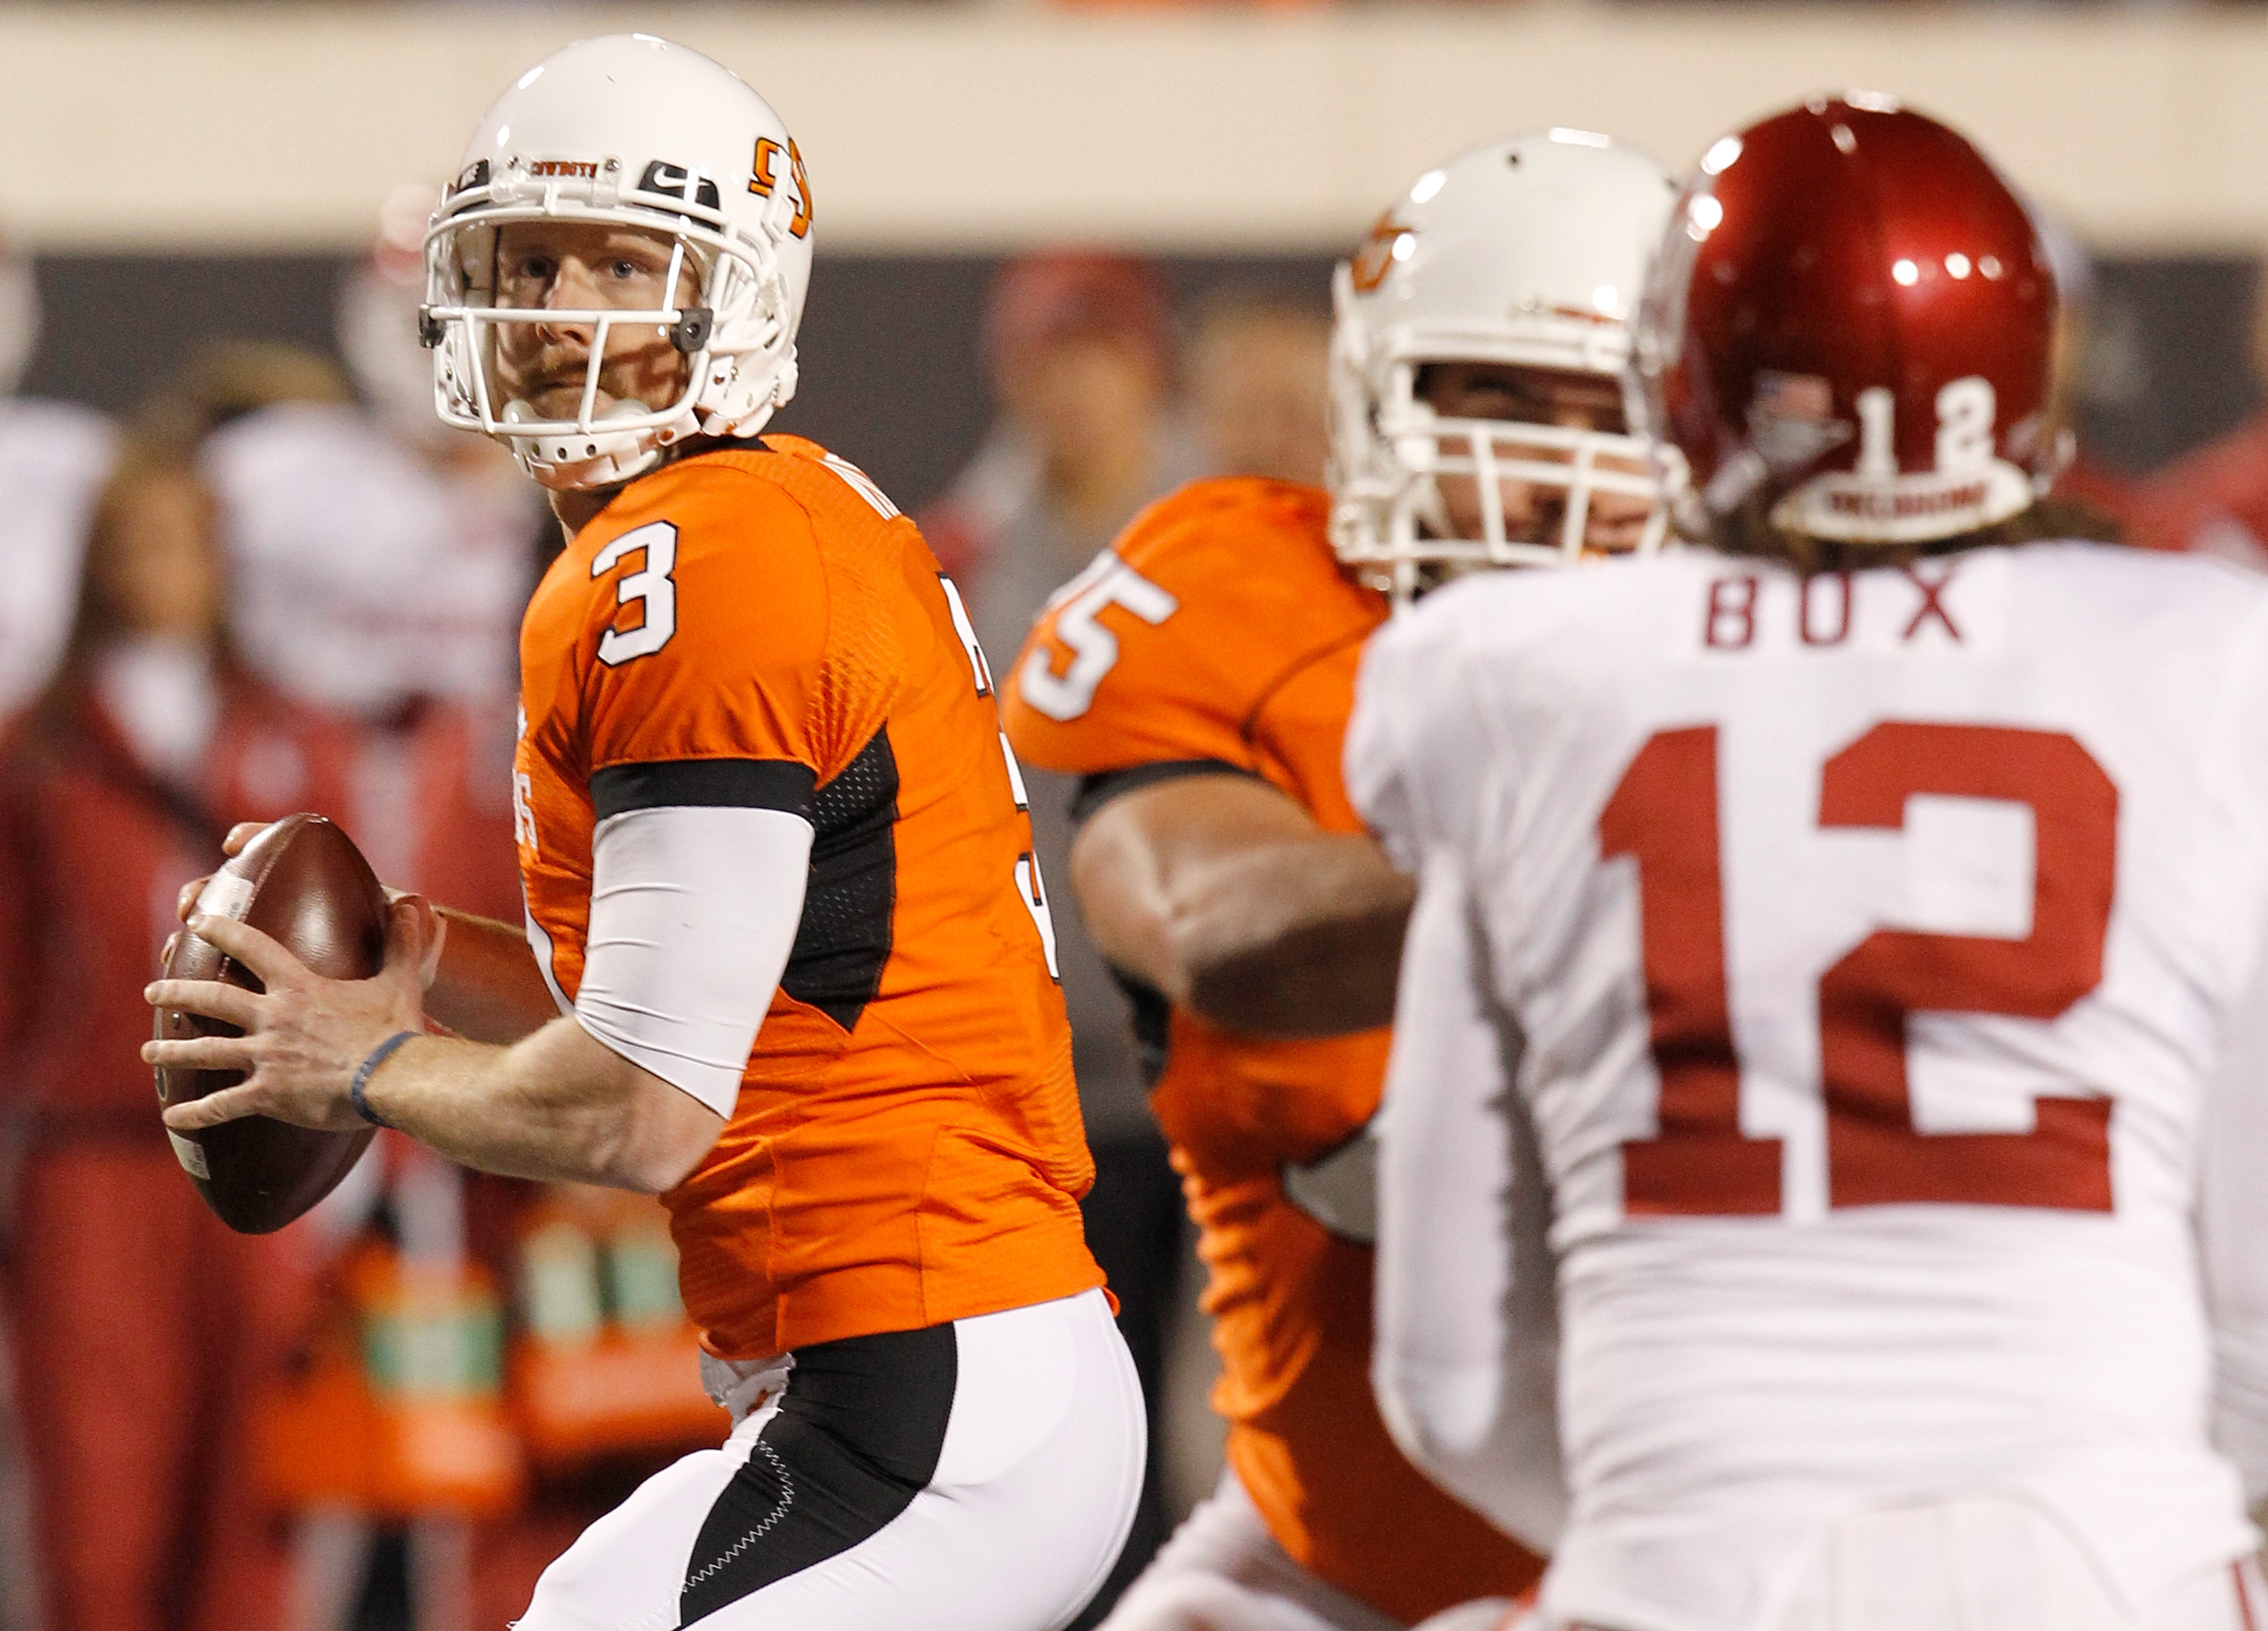 STILLWATER, OK - NOVEMBER 27:  Quarterback Brandon Weeden #3 of the Oklahoma State Cowboys looks for an open receiver against the Oklahoma Sooners at Boone Pickens Stadium on November 27, 2010 in Stillwater, Oklahoma.  (Photo by Tom Pennington/Getty Image